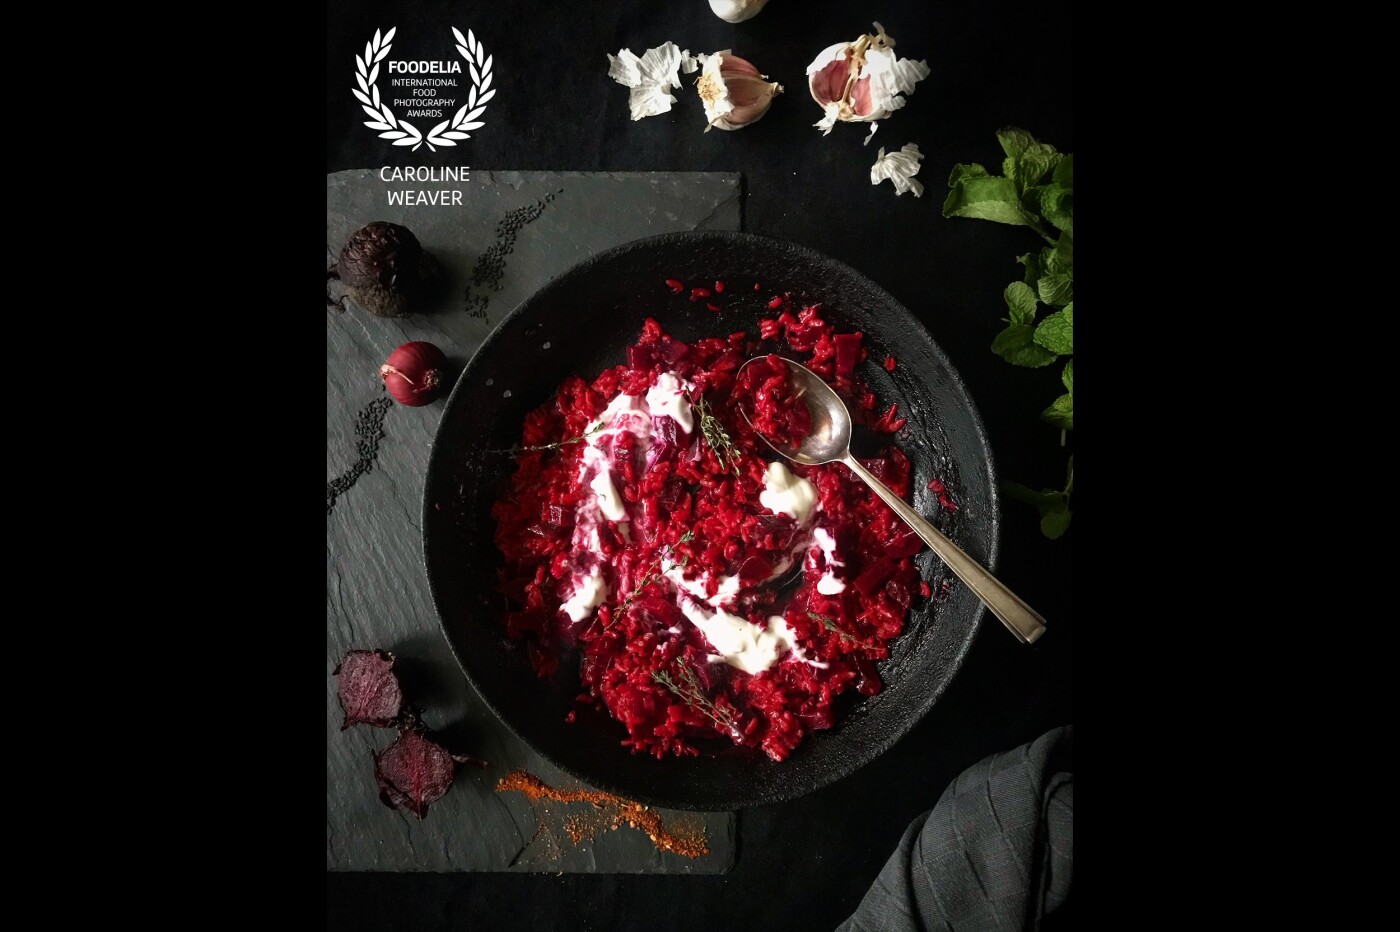 Capturing the last of the season’s beetroot in a vibrant, mouthwatering risotto, in stark relief against a textured black slate background. With just a sprinkling of nigella seeds, this really is a dish for all seasons.